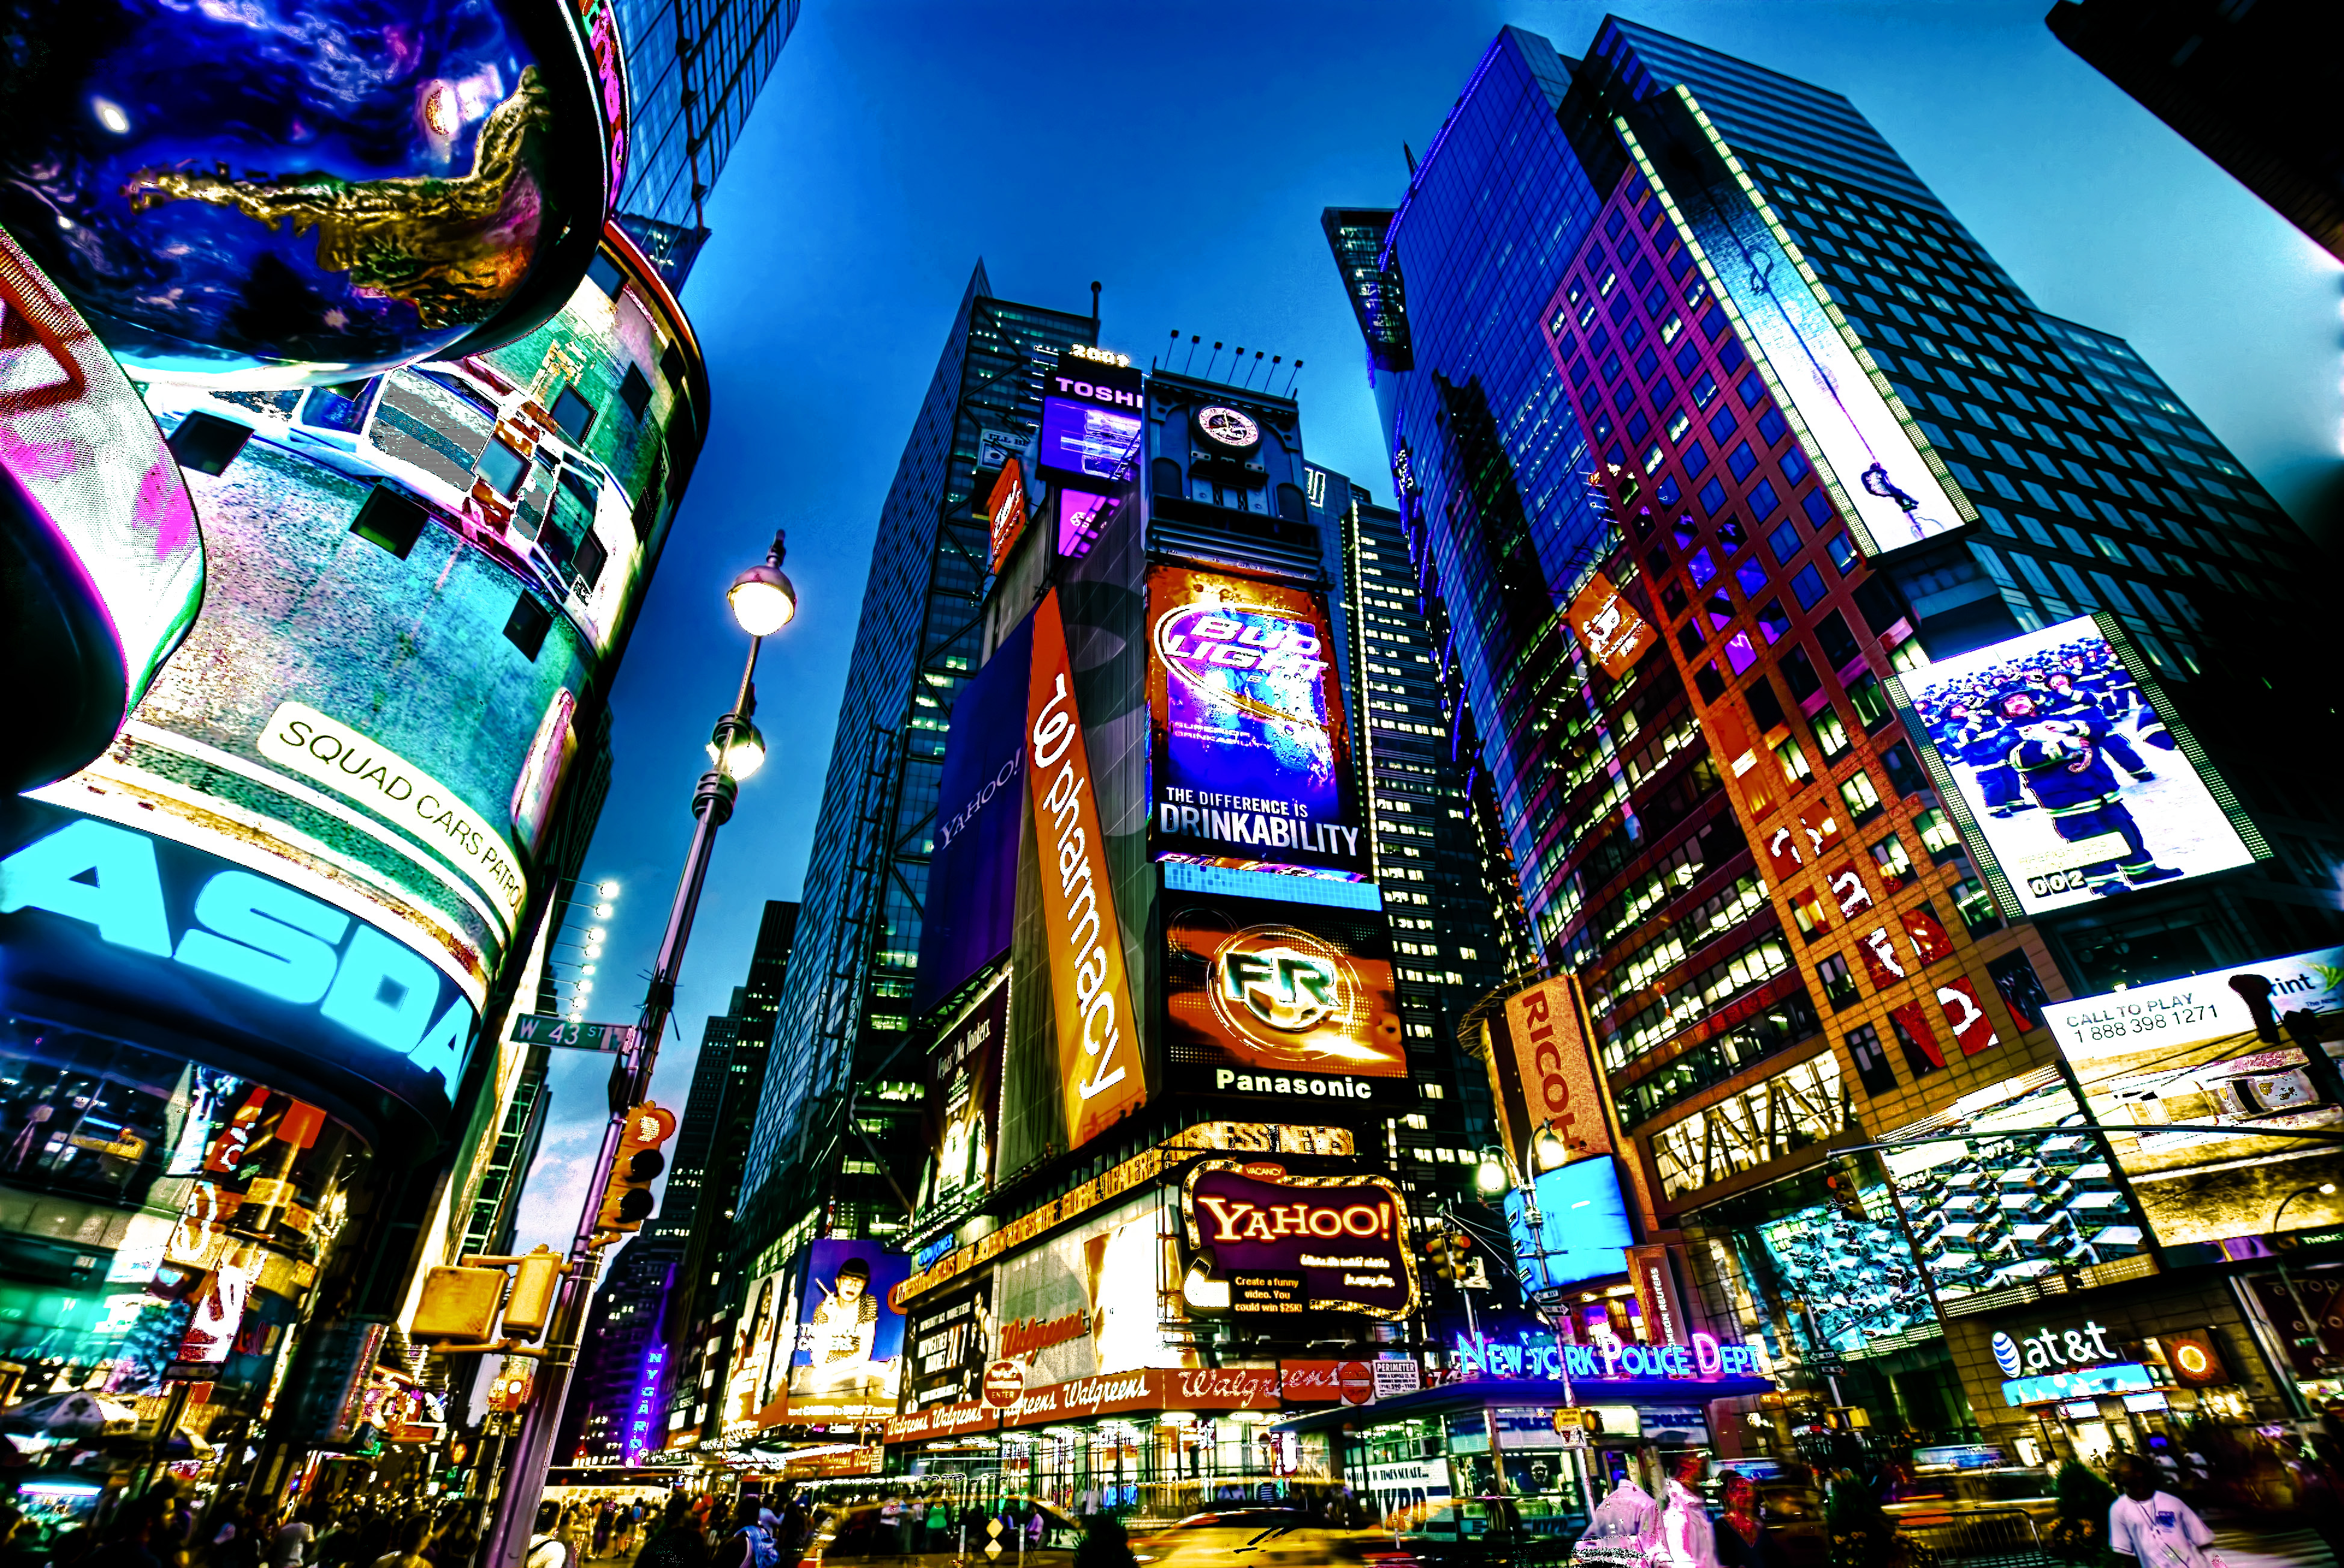 Times Square New York: The Most Famous Entertainment Centers in The